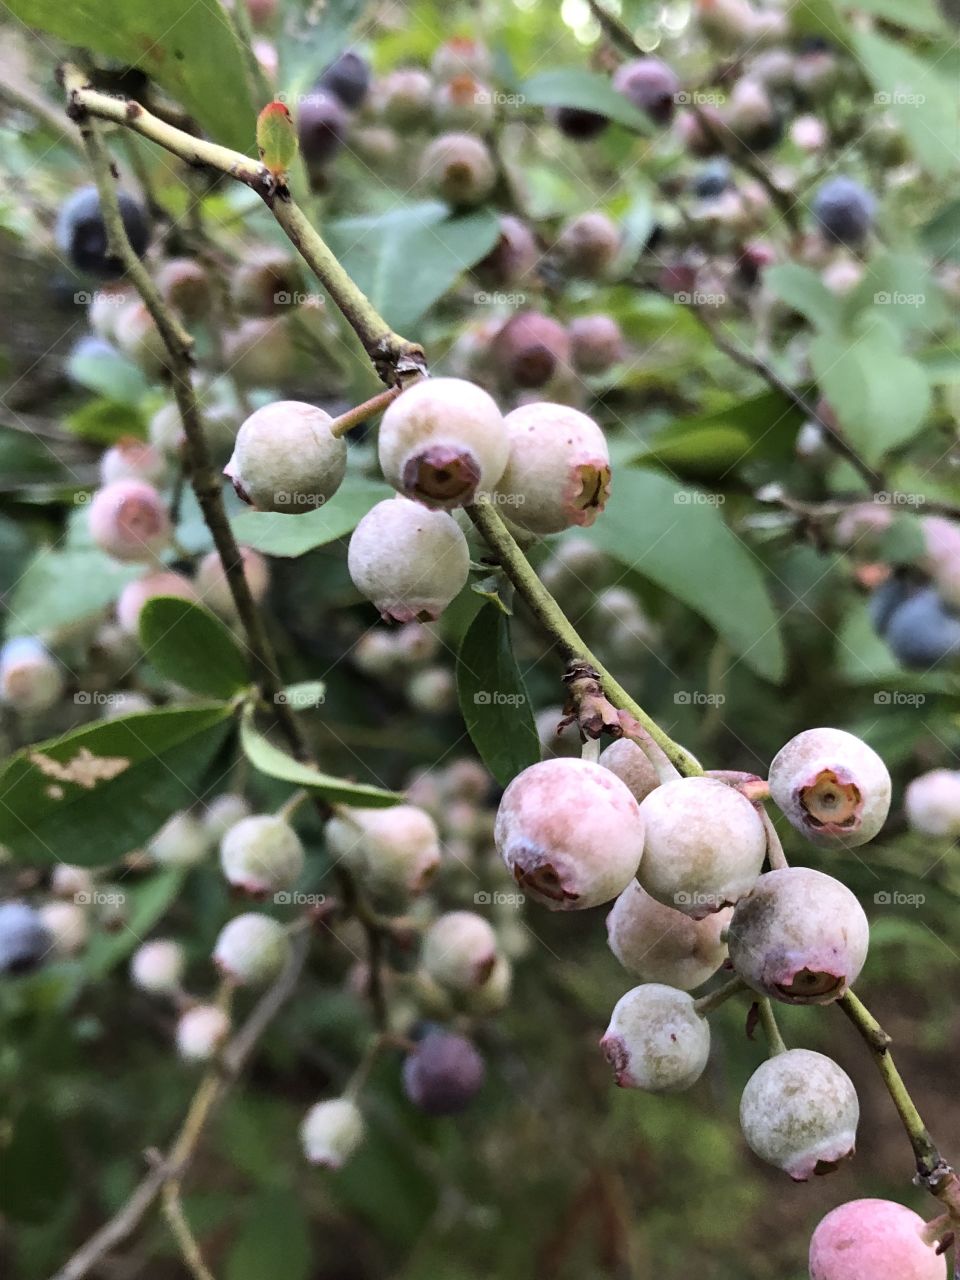 This is a bush of still growing blueberries.